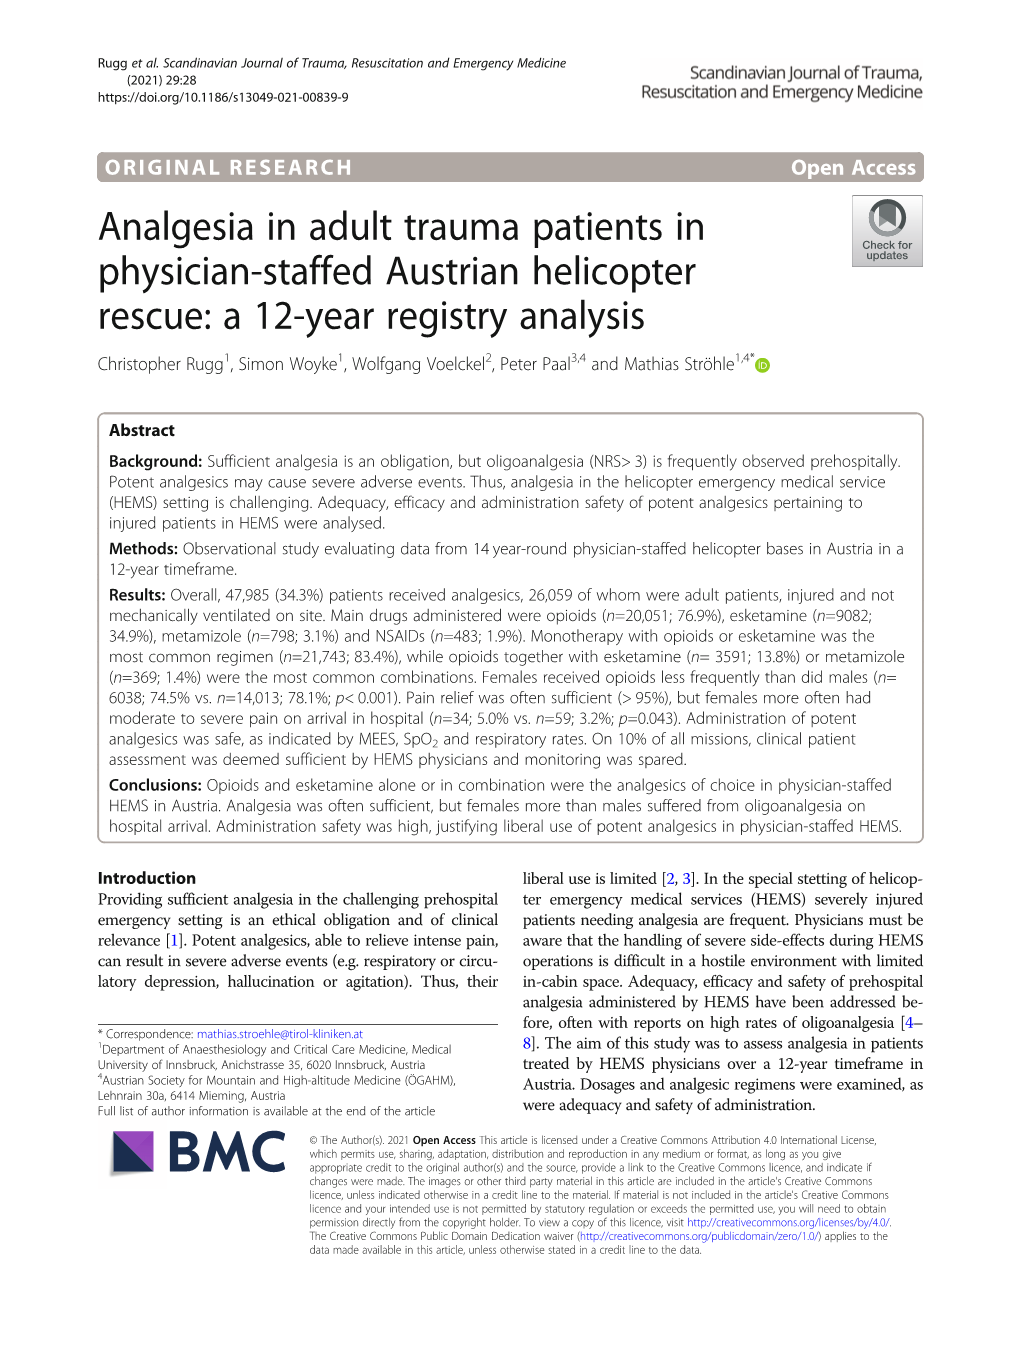 Analgesia in Adult Trauma Patients in Physician-Staffed Austrian Helicopter Rescue: a 12-Year Registry Analysis